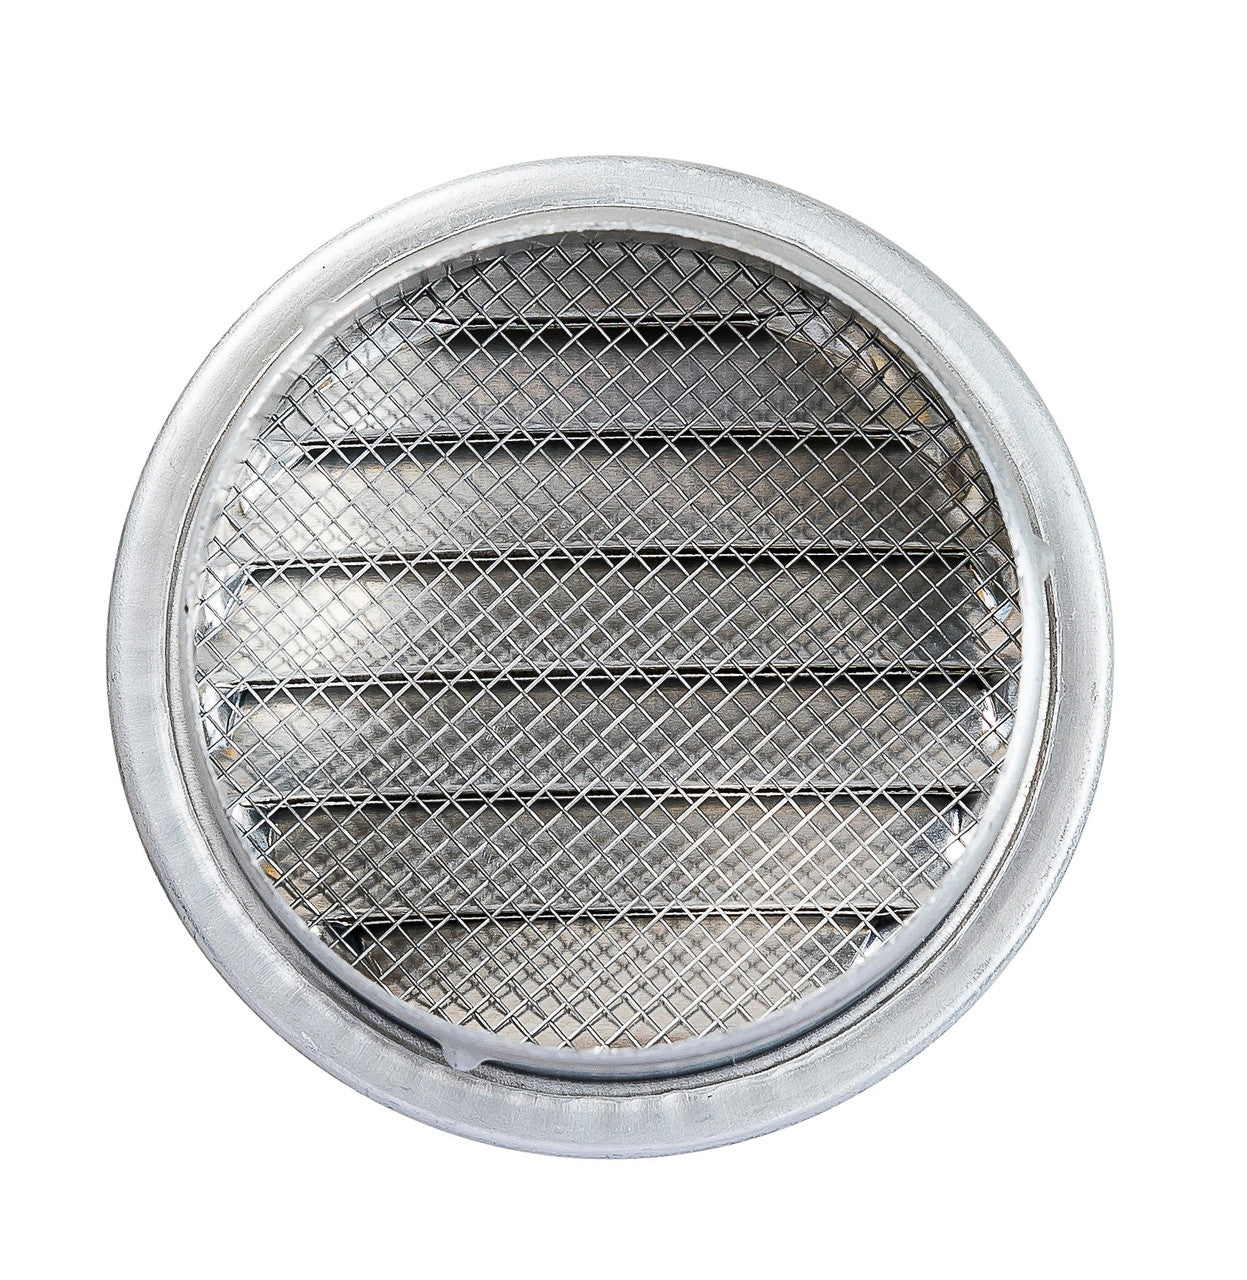 Maurice Franklin Louver 3" Round Aluminum Louver with Insect Screen (Priced Per Bag of 4). Item# 3" RL-100